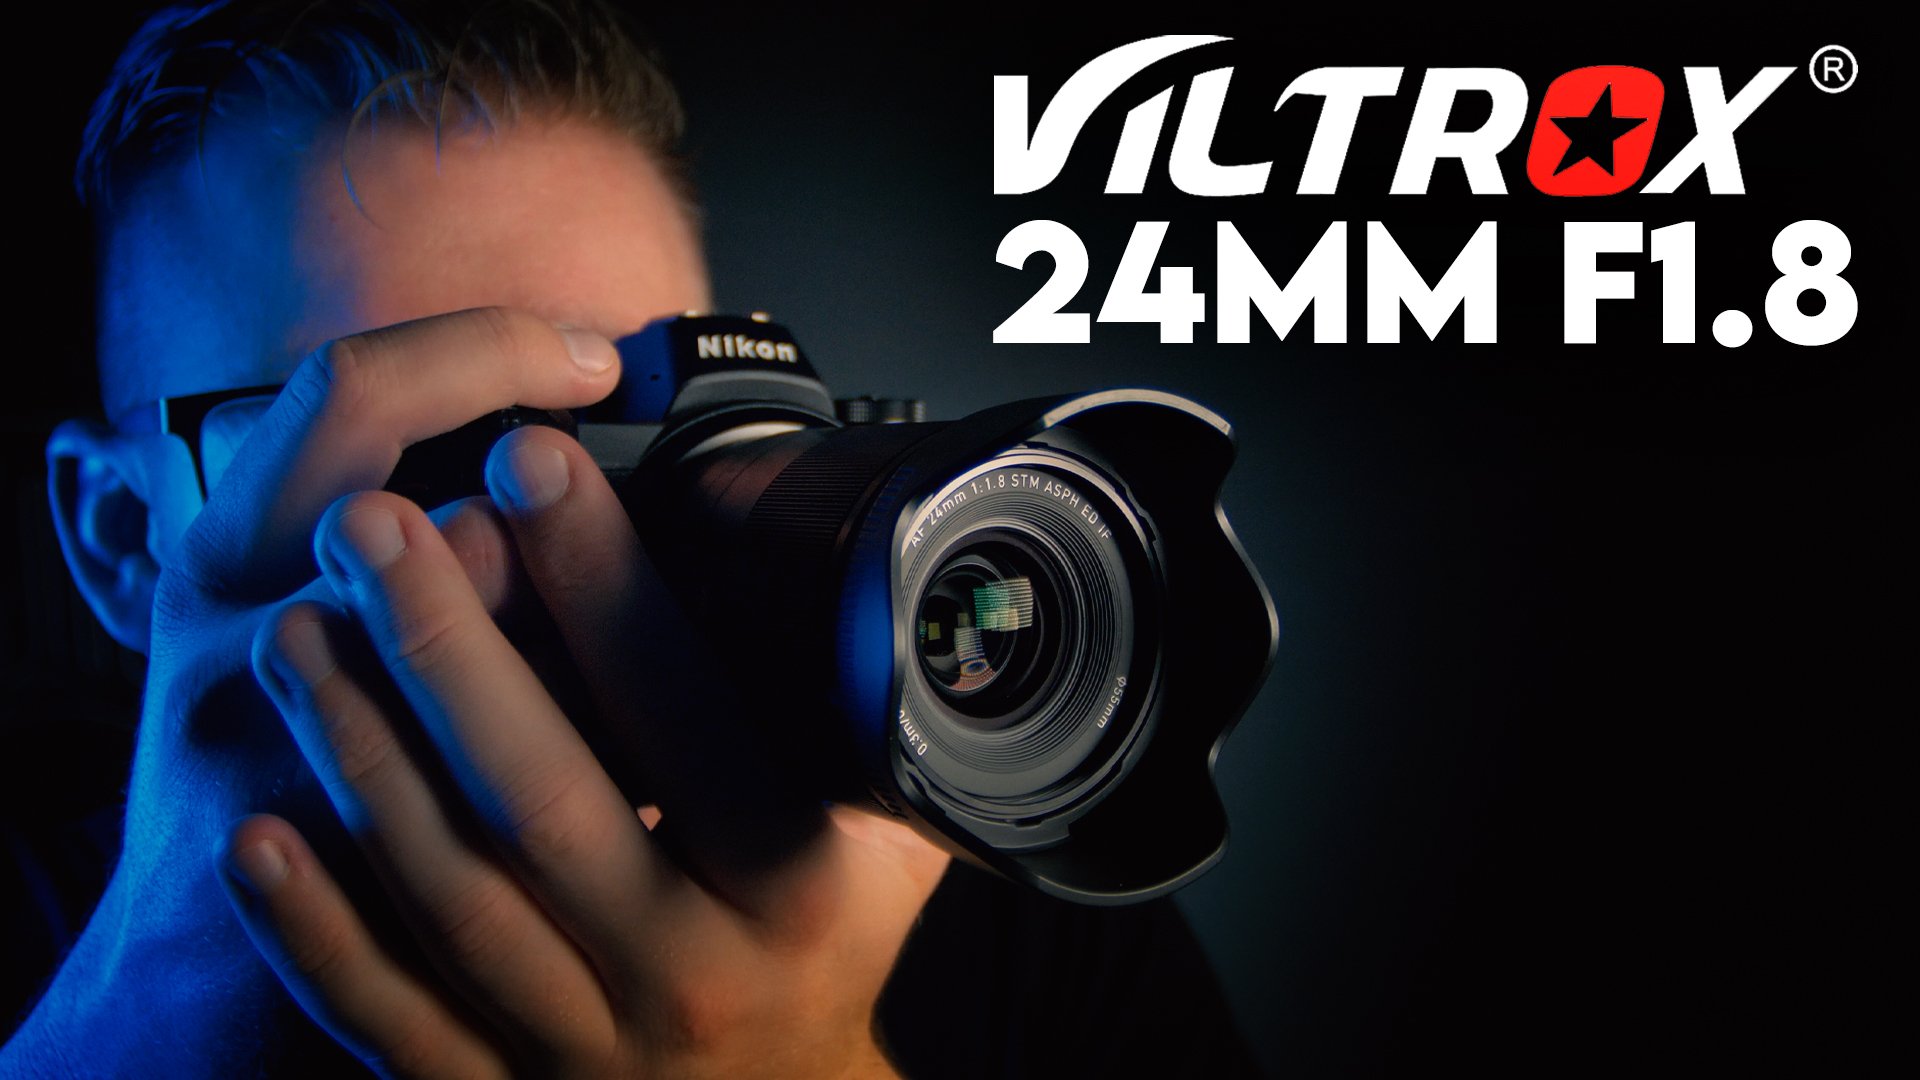 You are currently viewing Viltrox 24mm F1.8 Lens Review